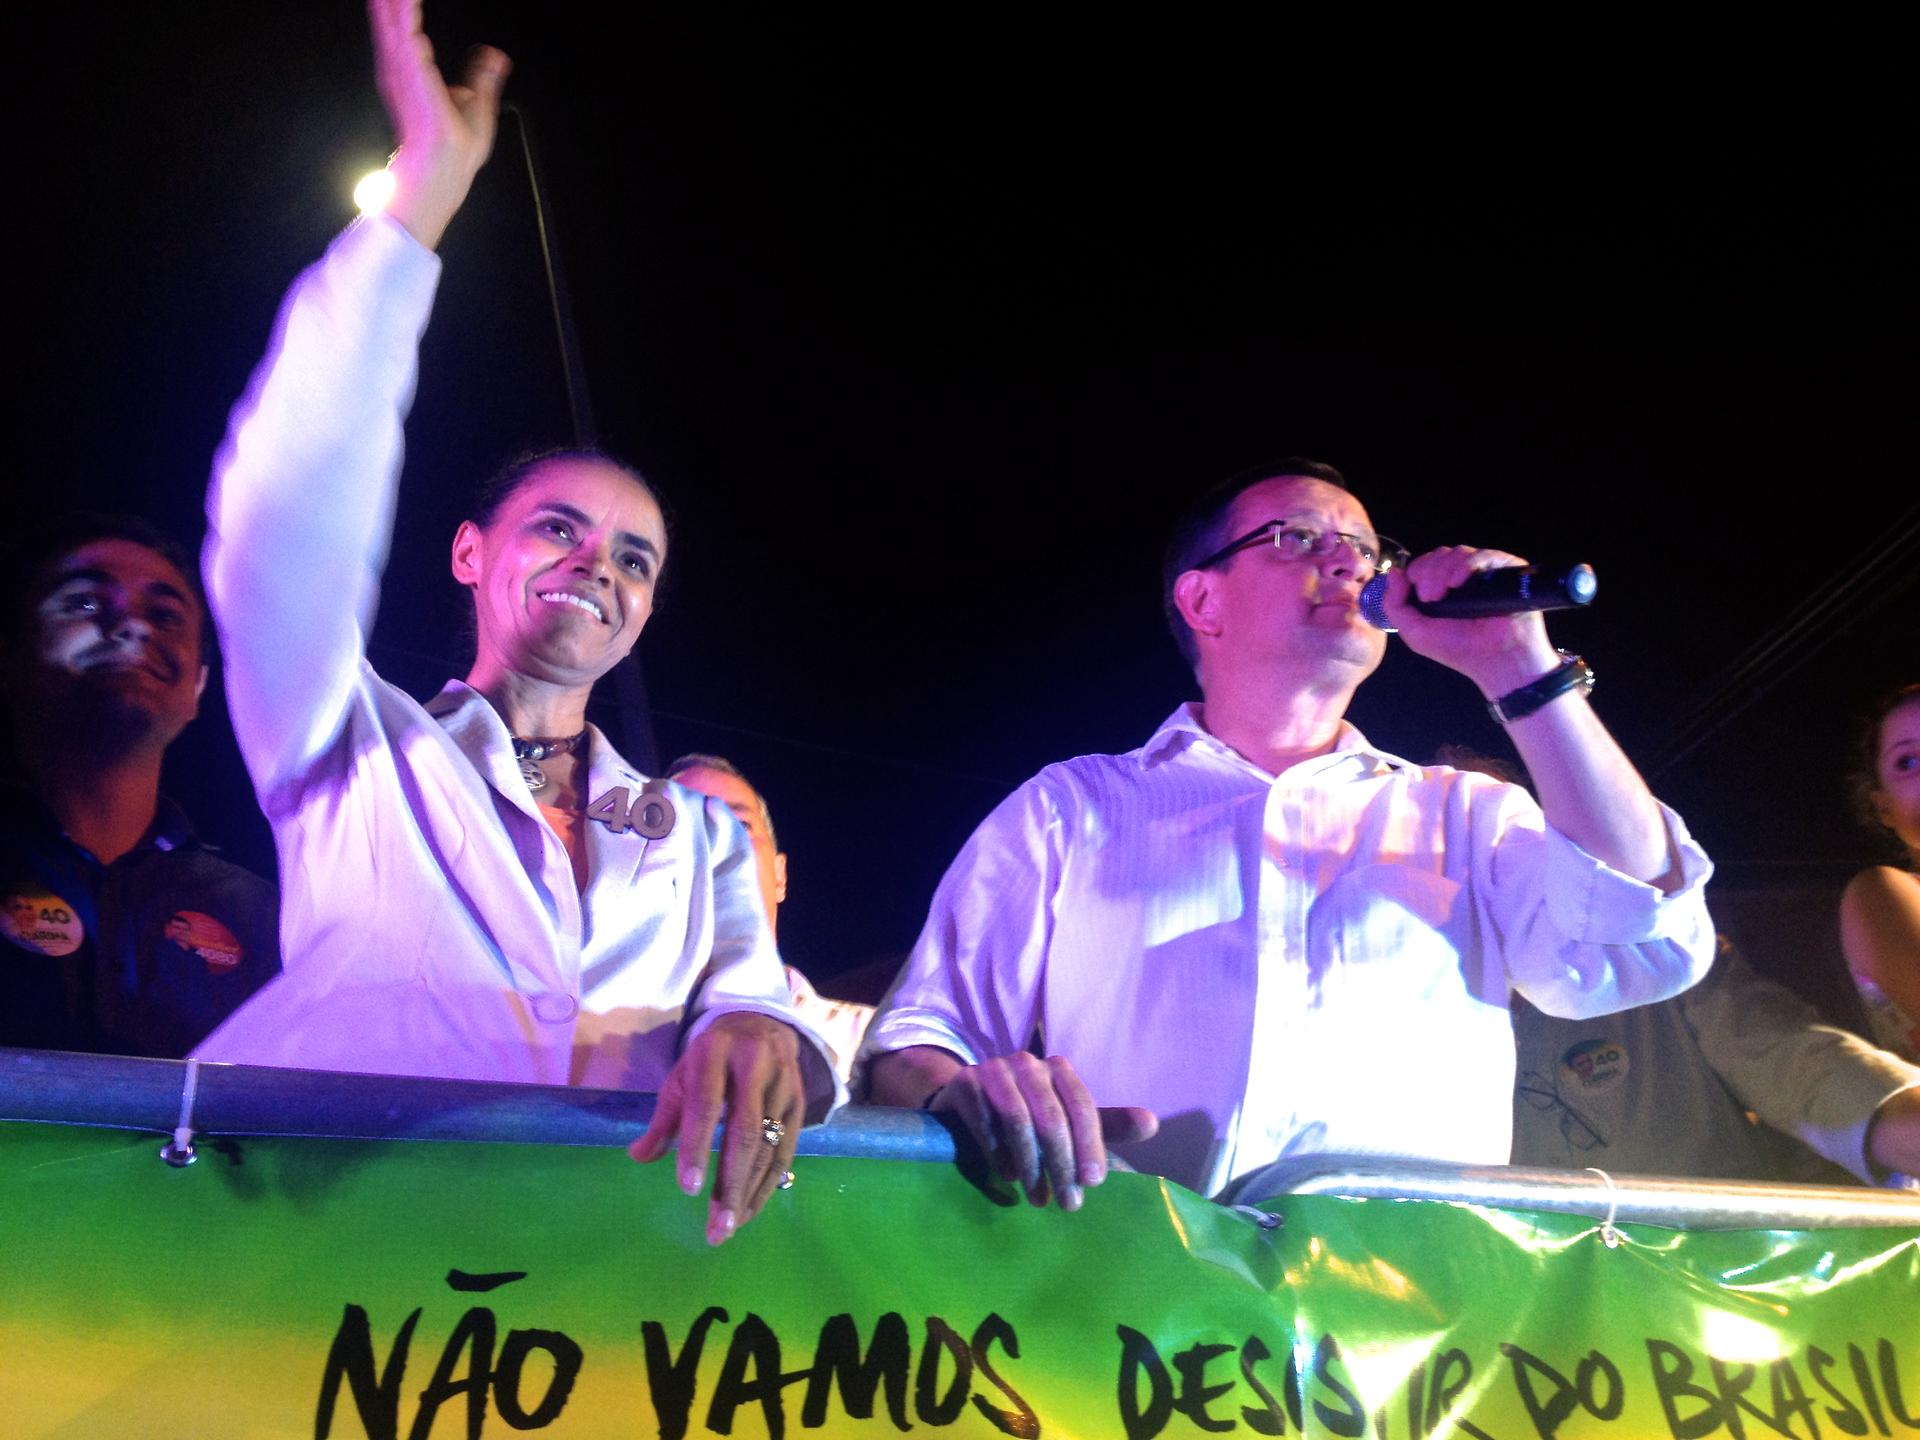 Presidential candidate Marina Silva is introduced at a recent rally in Rio de Janeiro, Brazil. 